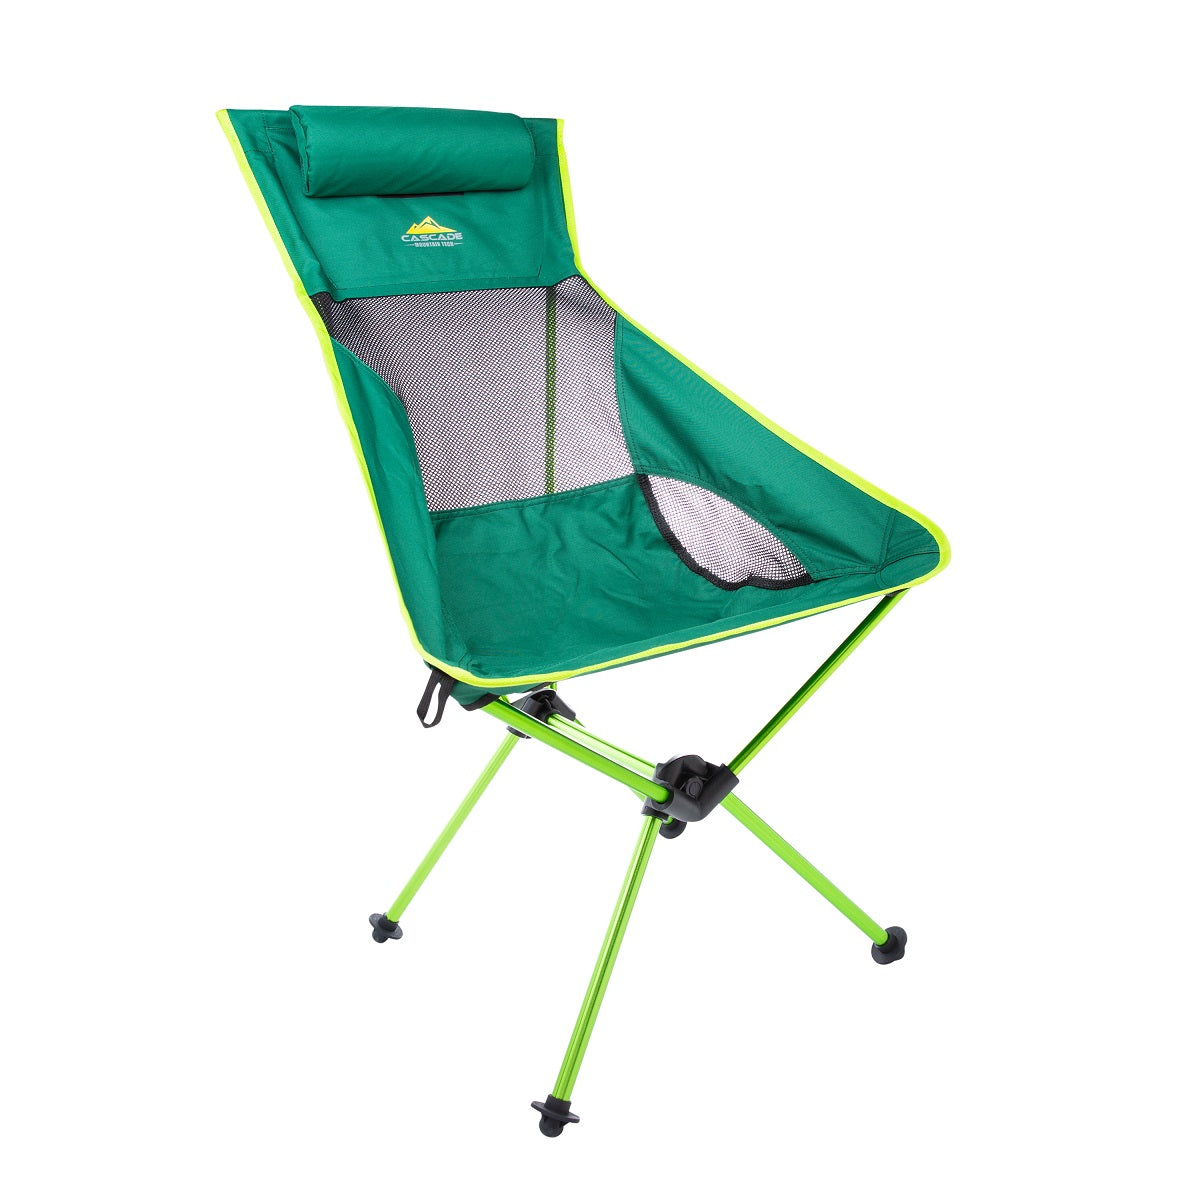 Camping Bungee Chair - Brilliant Promos - Be Brilliant!